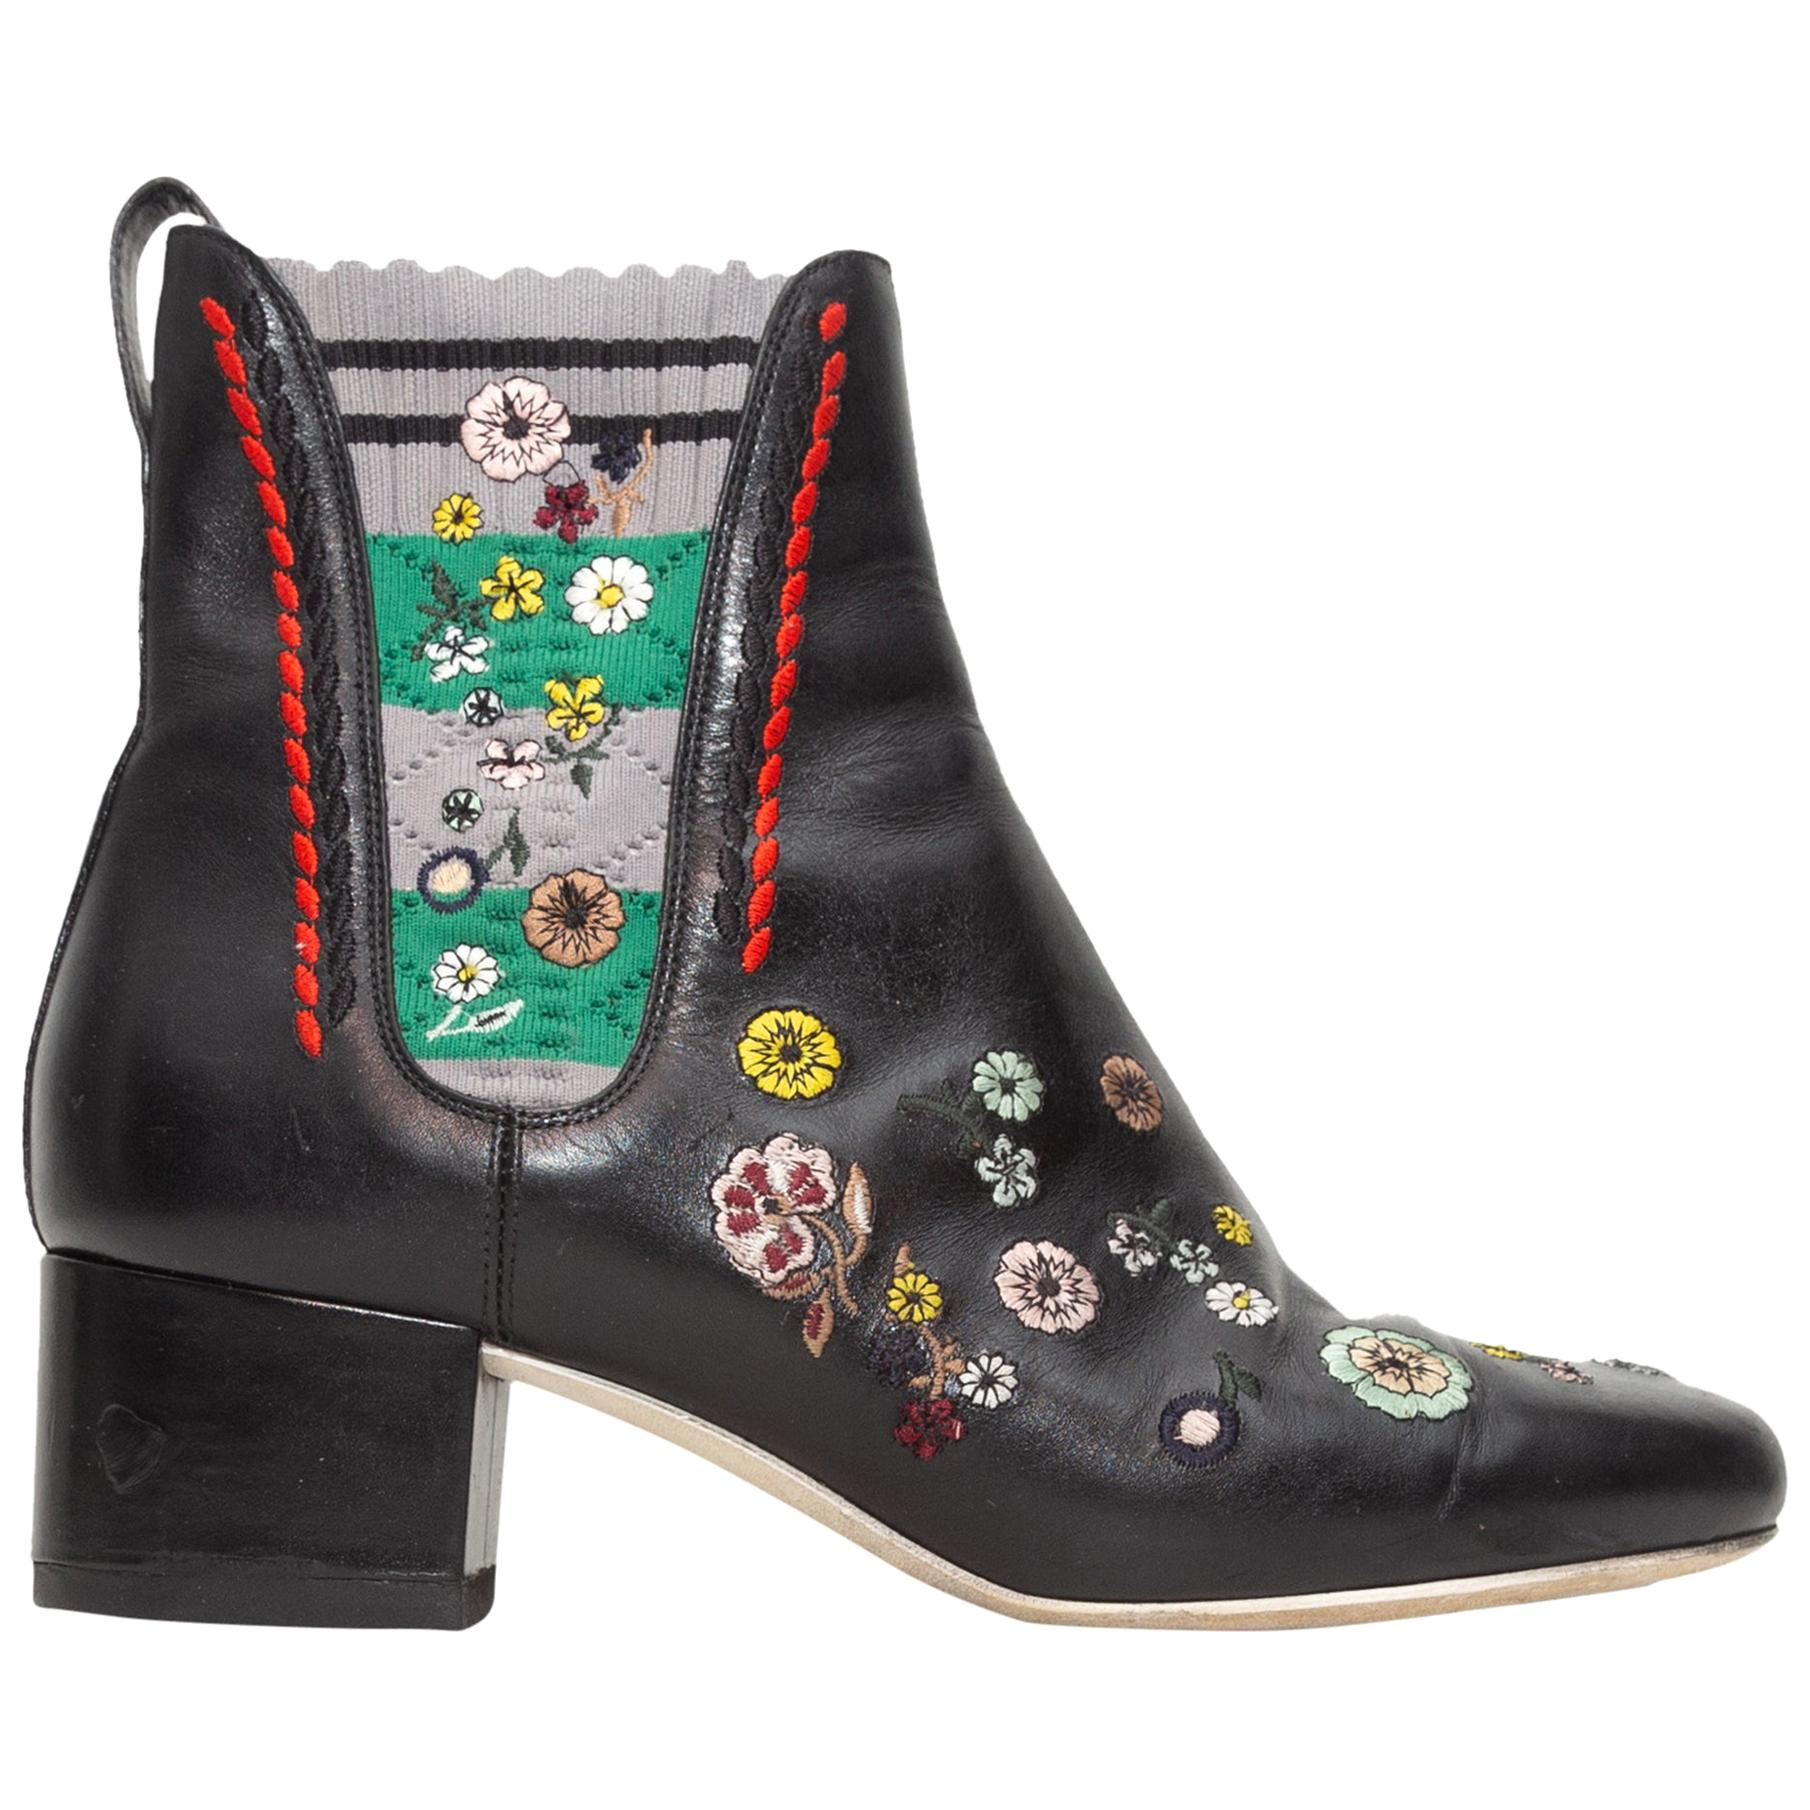 Fendi Black Leather Floral Embroidered Sock Boots